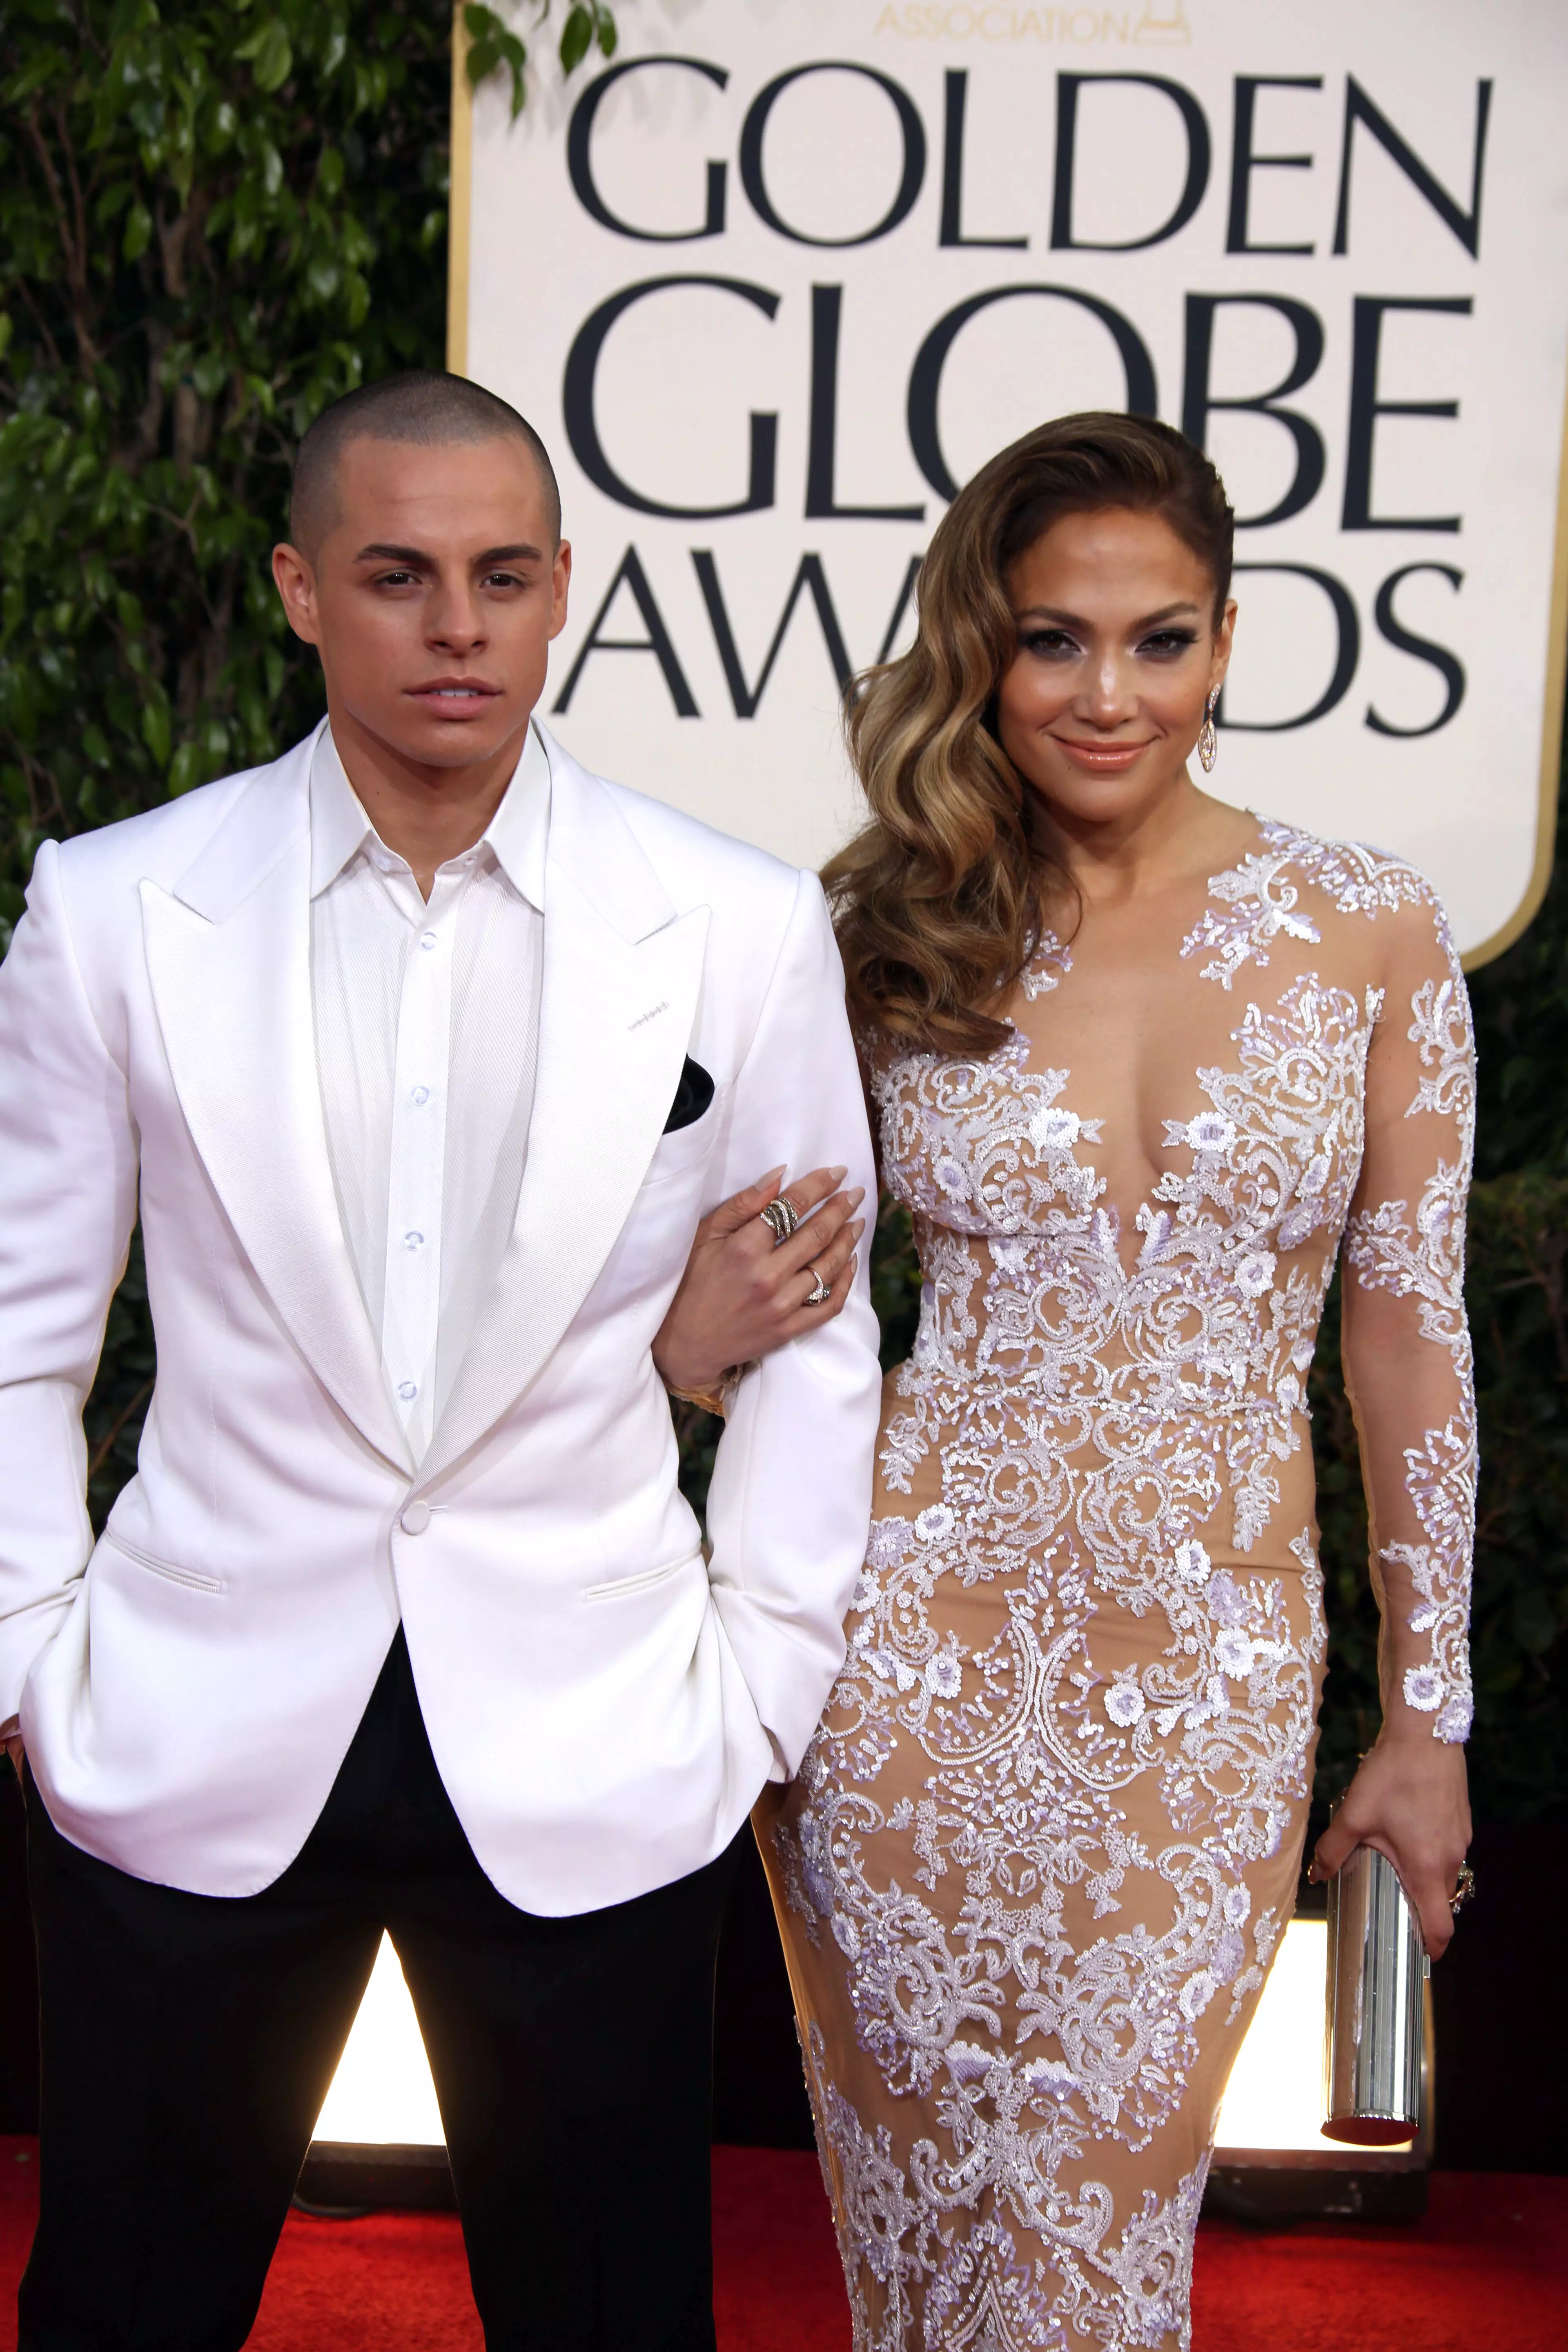 J.Lo and Casper Smart who she was dating for six years.